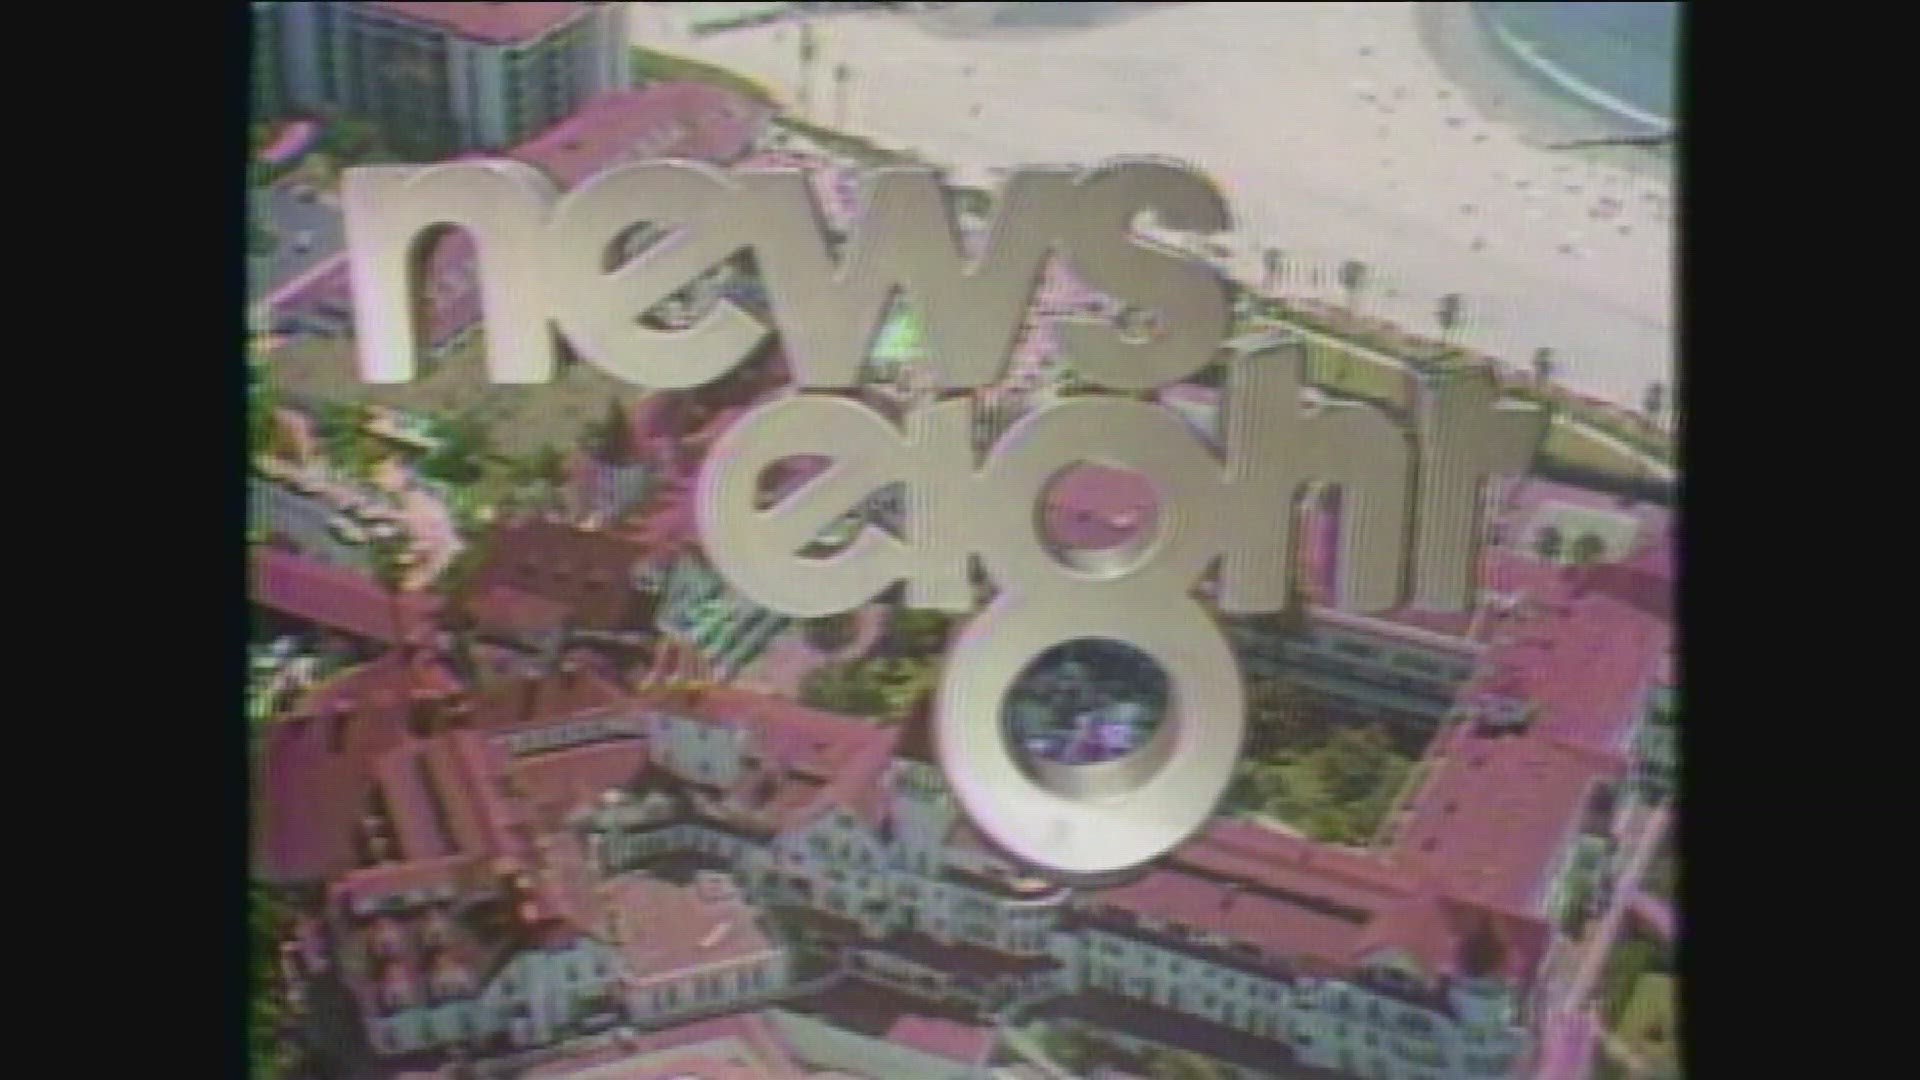 To celeberate 75 years of broadcasting, here's a look back at Michael Tuck giving a peak at how newscasts were produced in 1984.